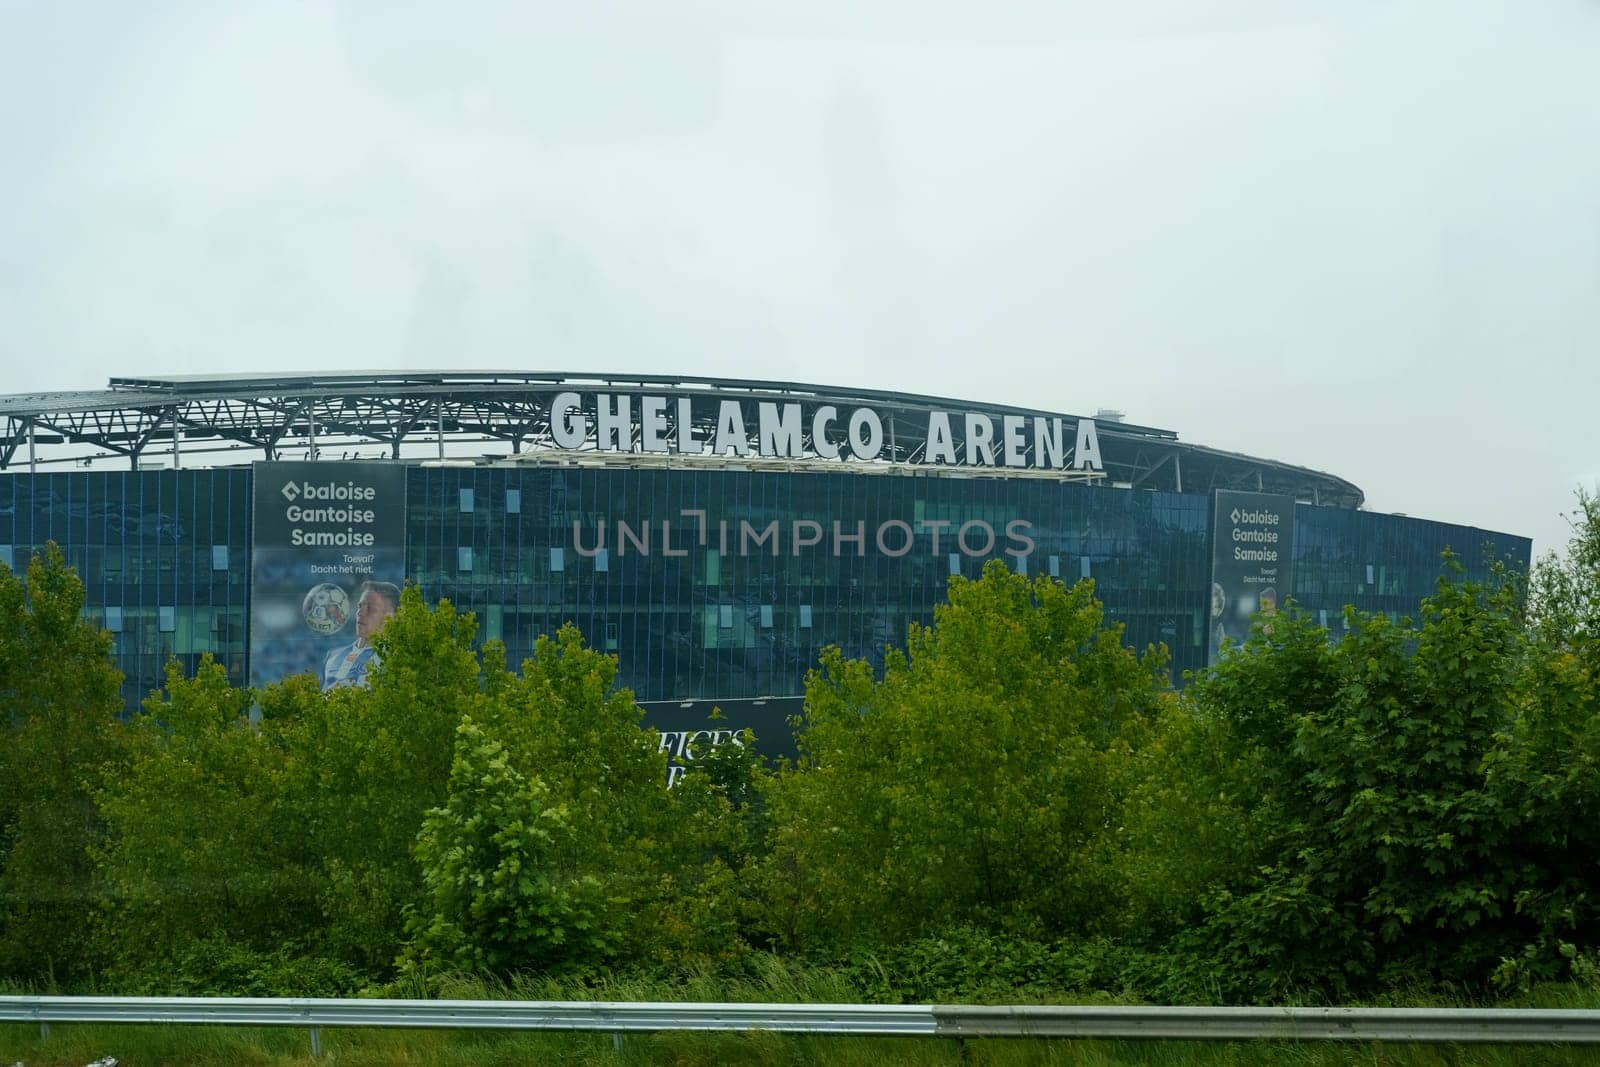 Ghent, Belgium - May 22, 2023: Ghelamco Arena, the home of KAA Gent football club, looms against a backdrop of gray skies, displaying its modern architecture and branding.